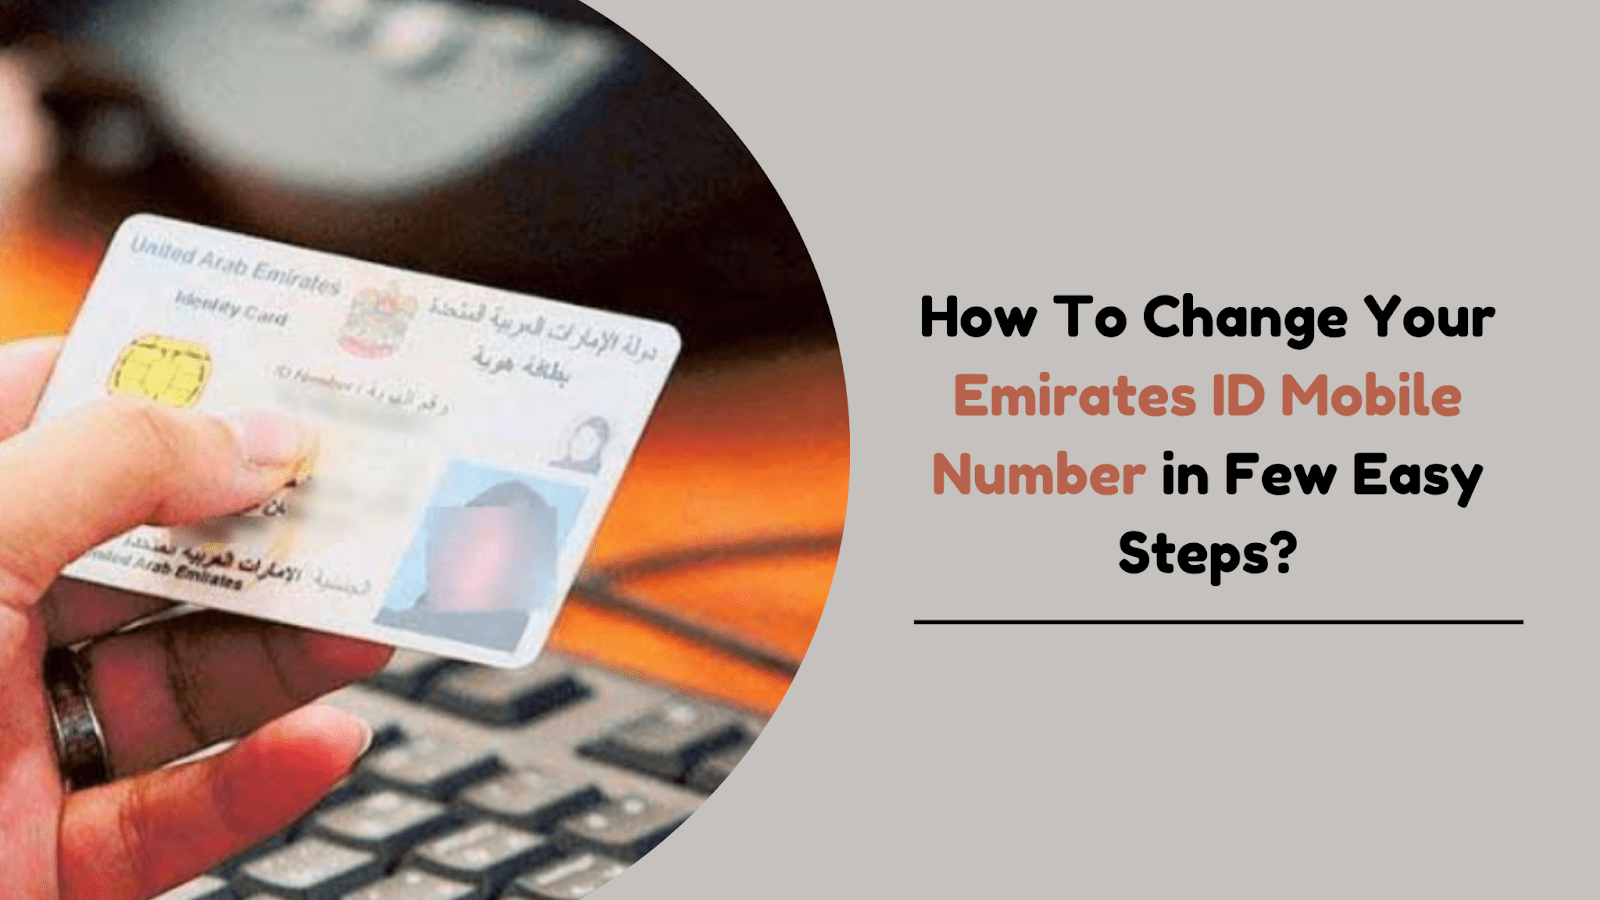 How To Change Emirates ID Mobile Number